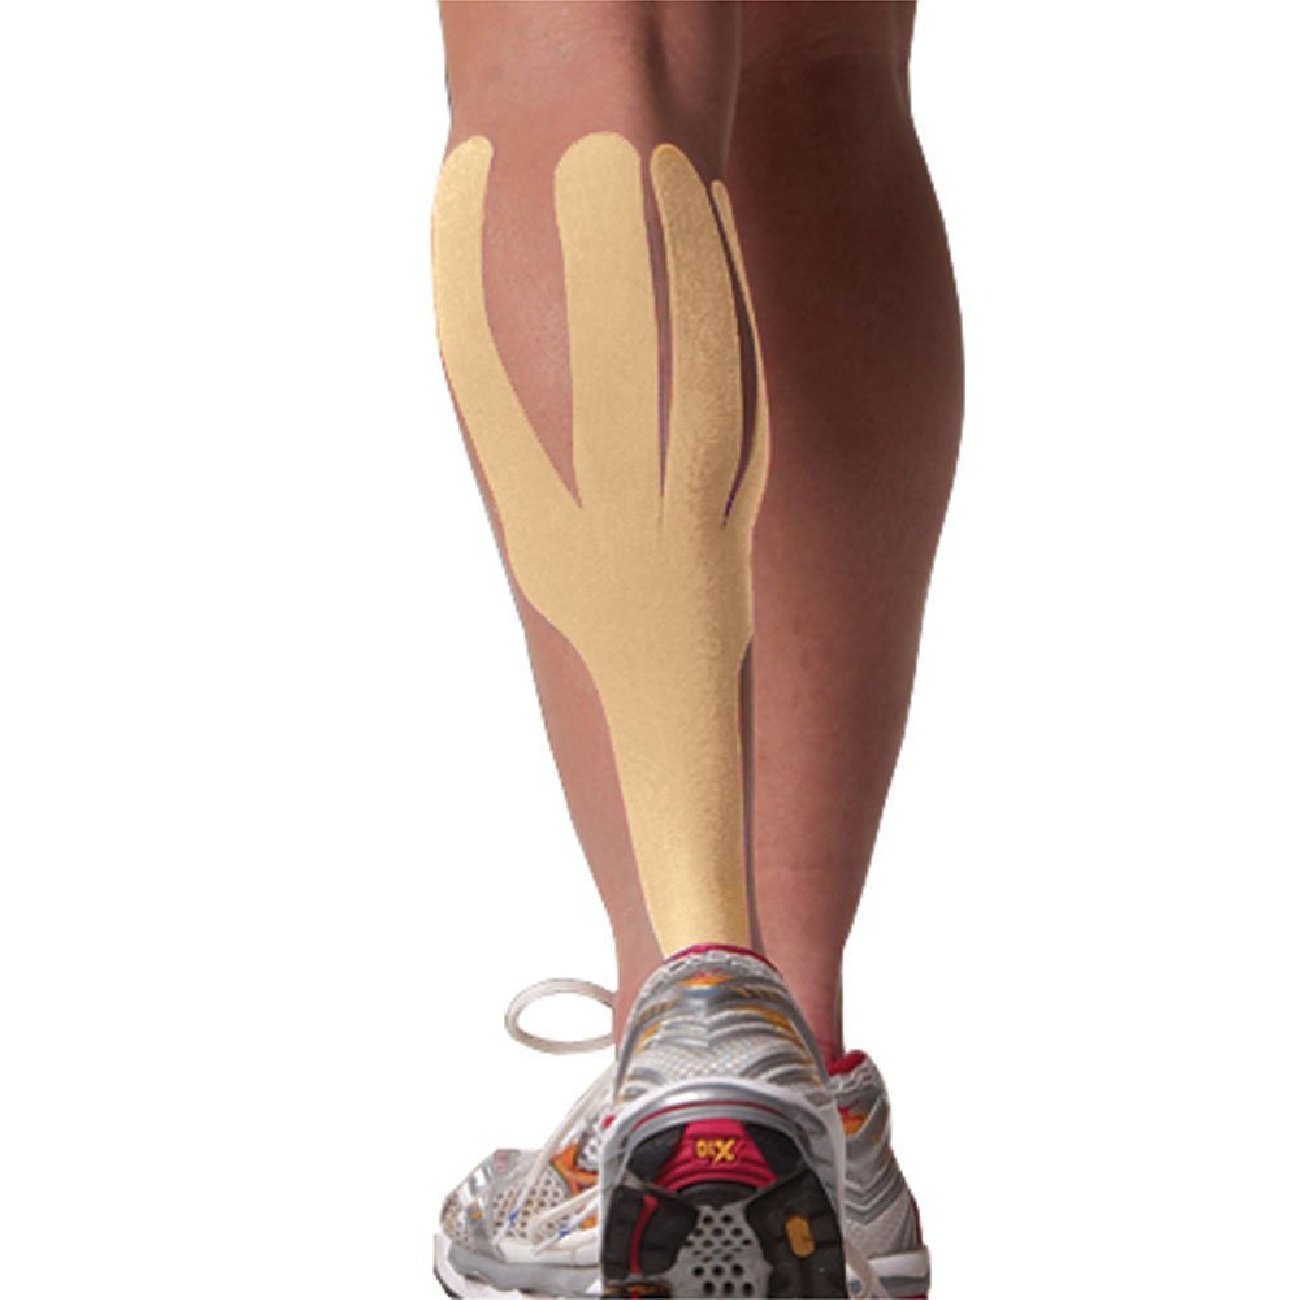 SpiderTech Calf and Arch Tape - Beige